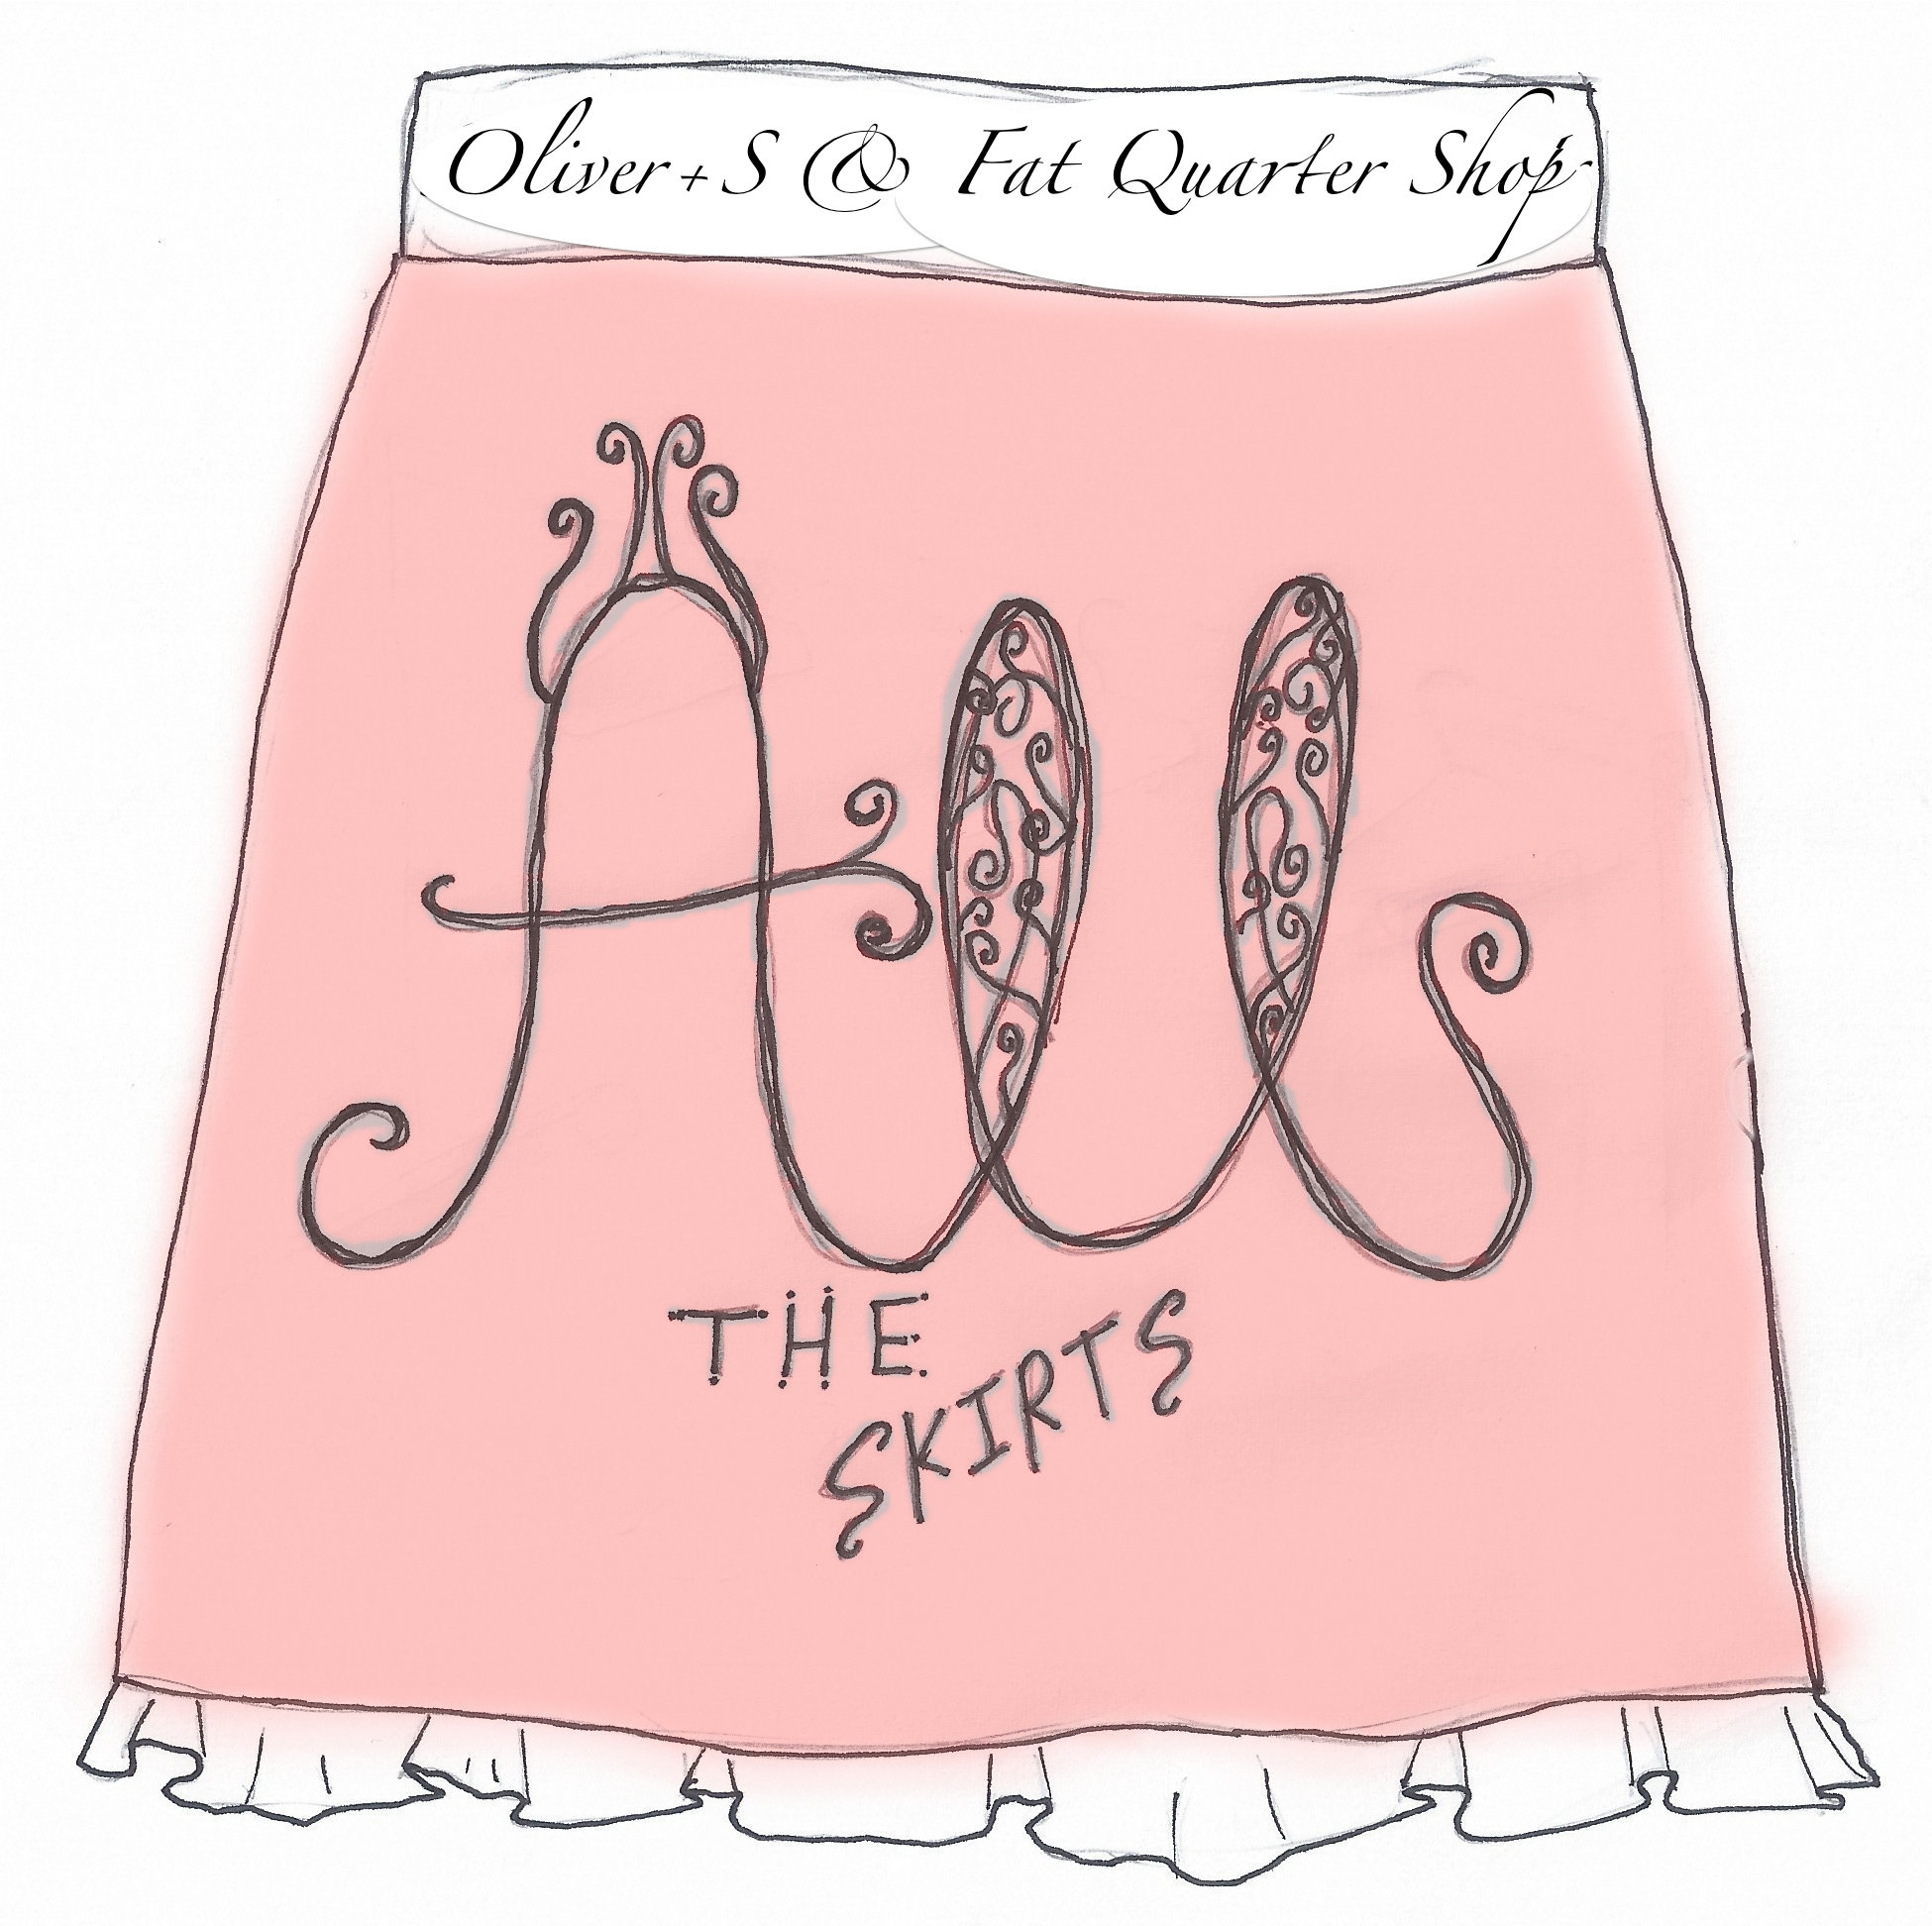 "All the Skirts" {with Skirt Fixation, Oliver + S, and Fat Quarter Shop}